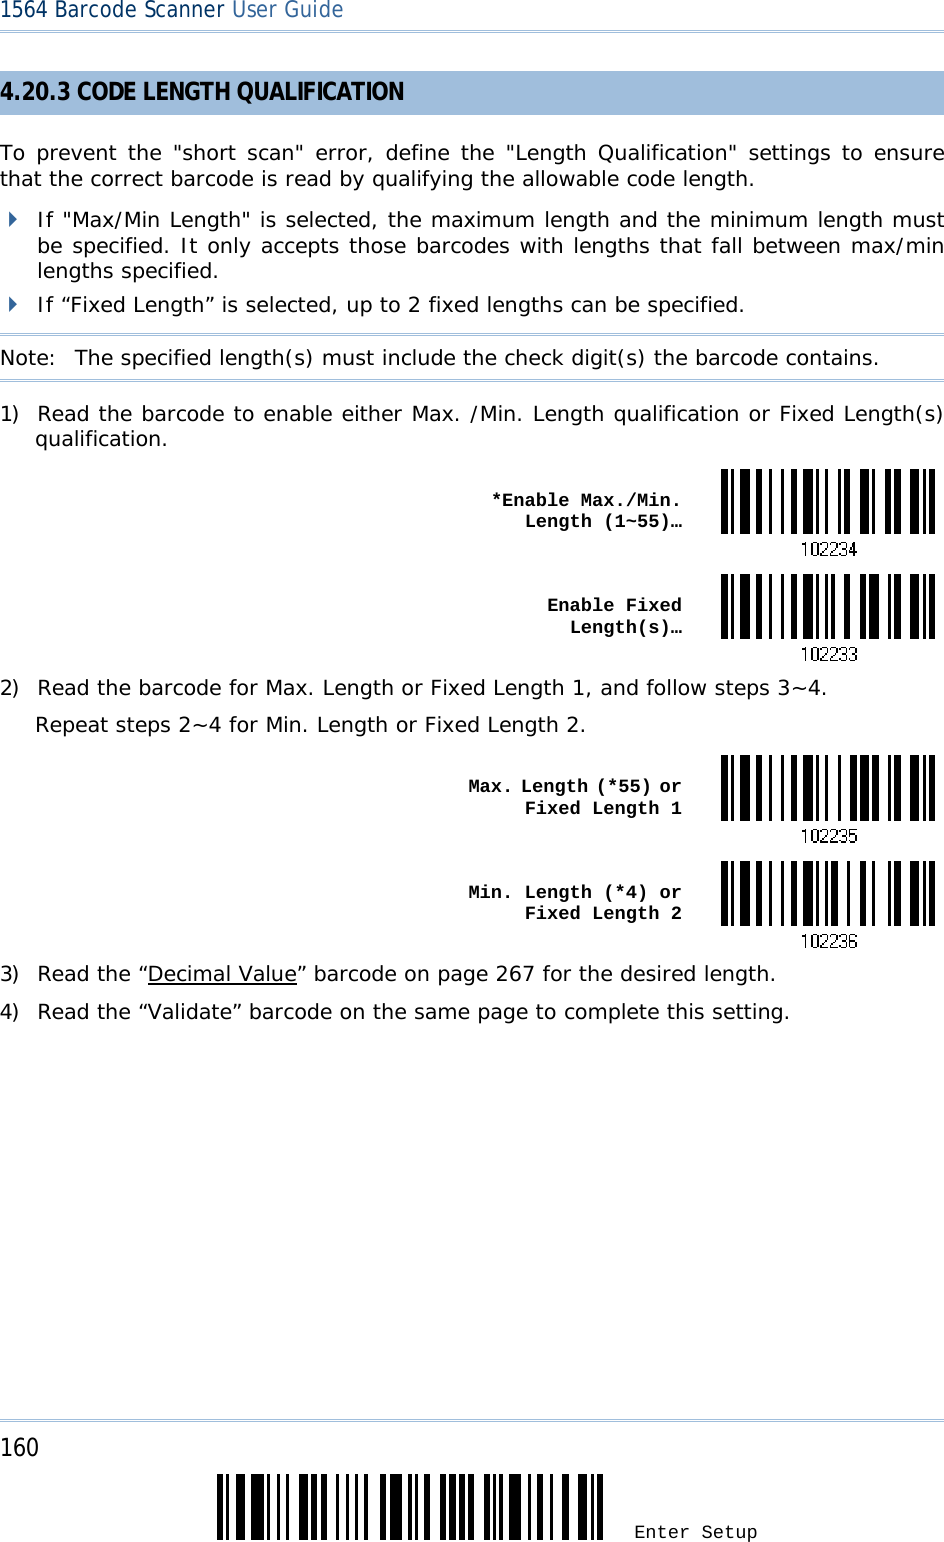 160 Enter Setup 1564 Barcode Scanner User Guide  4.20.3 CODE LENGTH QUALIFICATION To prevent the &quot;short scan&quot; error, define the &quot;Length Qualification&quot; settings to ensure that the correct barcode is read by qualifying the allowable code length.   If &quot;Max/Min Length&quot; is selected, the maximum length and the minimum length must be specified. It only accepts those barcodes with lengths that fall between max/min lengths specified.  If “Fixed Length” is selected, up to 2 fixed lengths can be specified. Note:   The specified length(s) must include the check digit(s) the barcode contains. 1) Read the barcode to enable either Max. /Min. Length qualification or Fixed Length(s) qualification.  *Enable Max./Min. Length (1~55)… Enable Fixed Length(s)…2) Read the barcode for Max. Length or Fixed Length 1, and follow steps 3~4. Repeat steps 2~4 for Min. Length or Fixed Length 2.  Max. Length (*55) or Fixed Length 1 Min. Length (*4) or Fixed Length 23) Read the “Decimal Value” barcode on page 267 for the desired length.  4) Read the “Validate” barcode on the same page to complete this setting. 